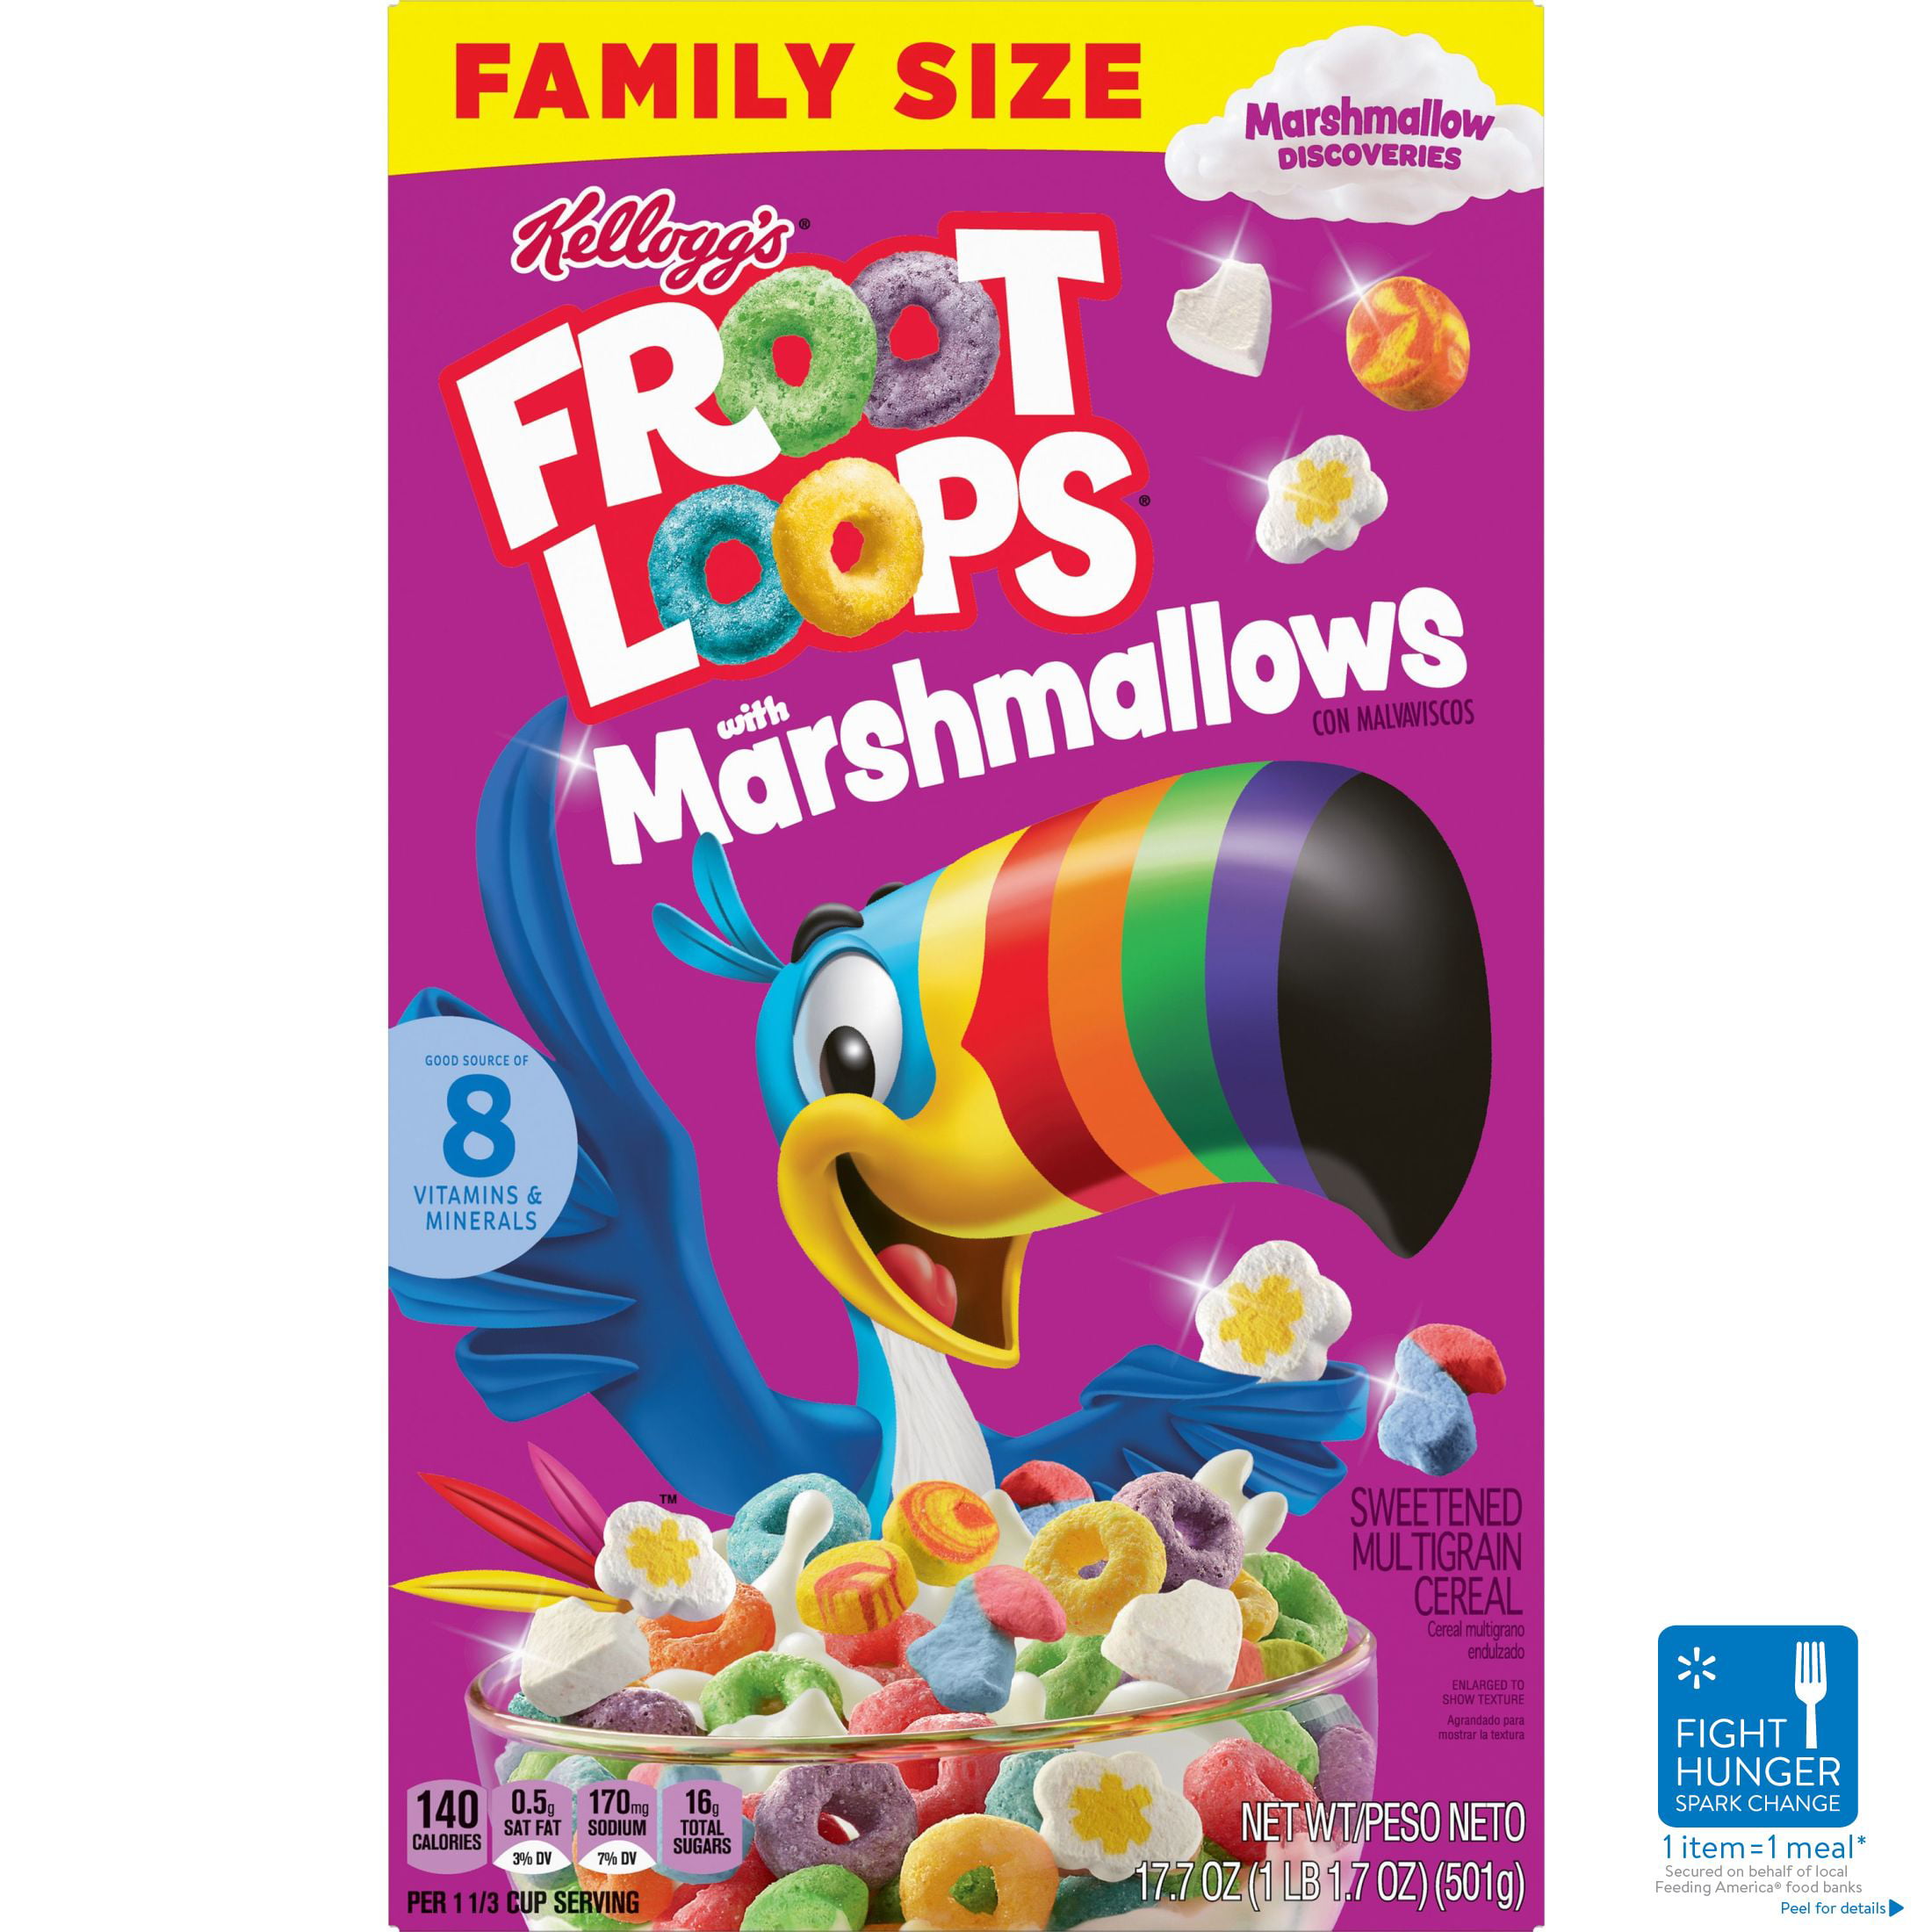 Kellogg's Froot Loops Original with Marshmallows Cold Breakfast Cereal, 17.7 oz